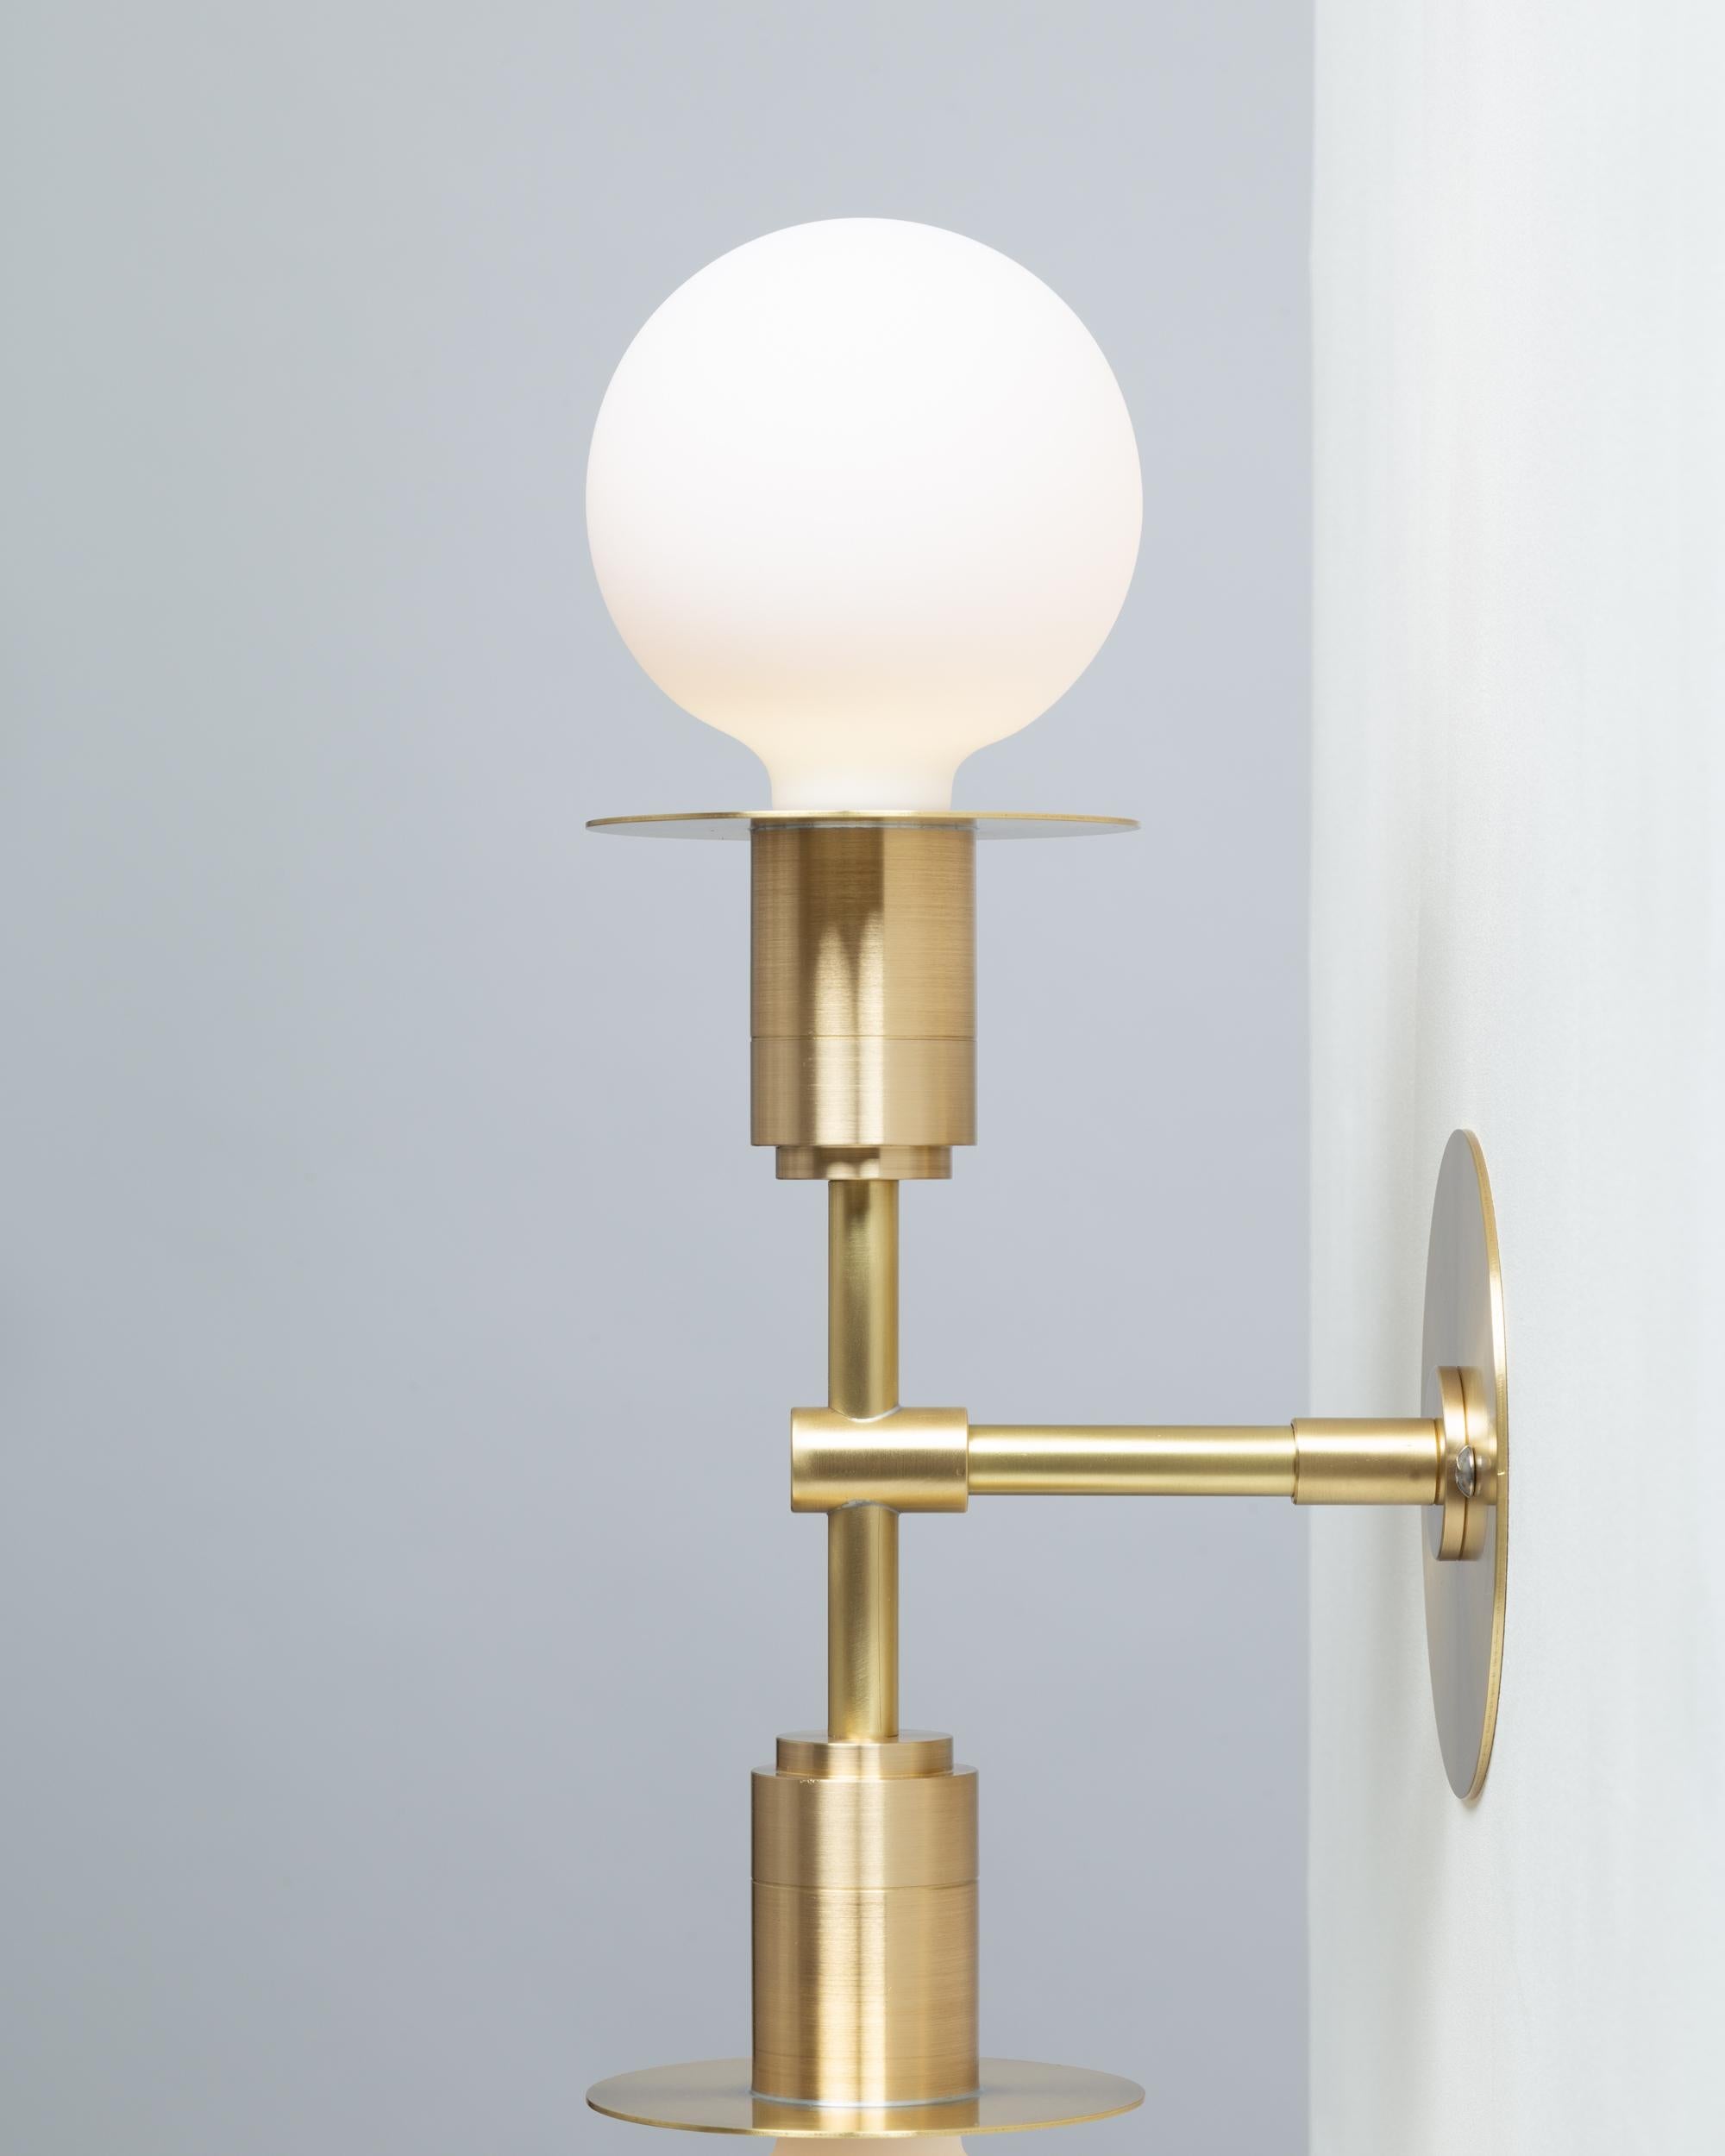 Hand-Crafted Double Sphere Disc Flush Mount Wall Light Sconce by Lights of London For Sale